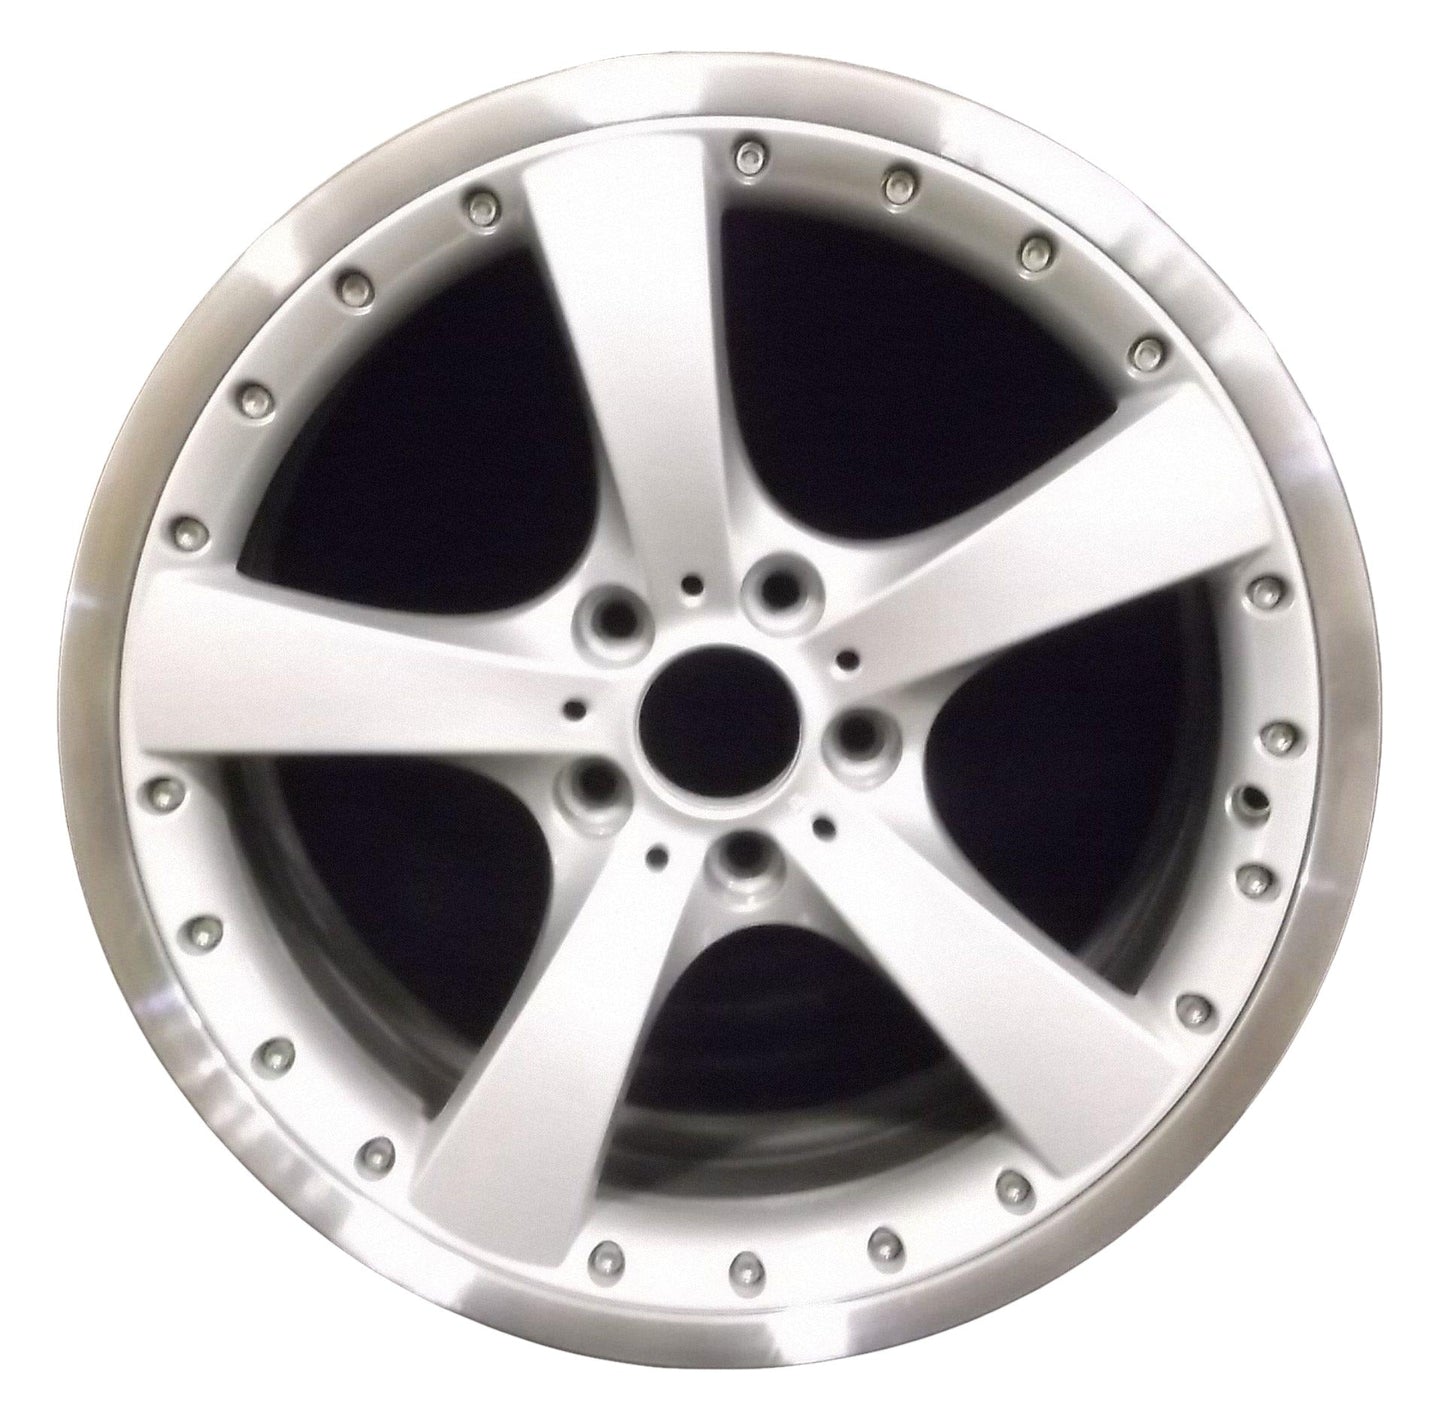 BMW 323i  2006, 2007, 2008, 2009, 2010, 2011, 2012 Factory OEM Car Wheel Size 19x9 Alloy WAO.59589RE.PS14.FC